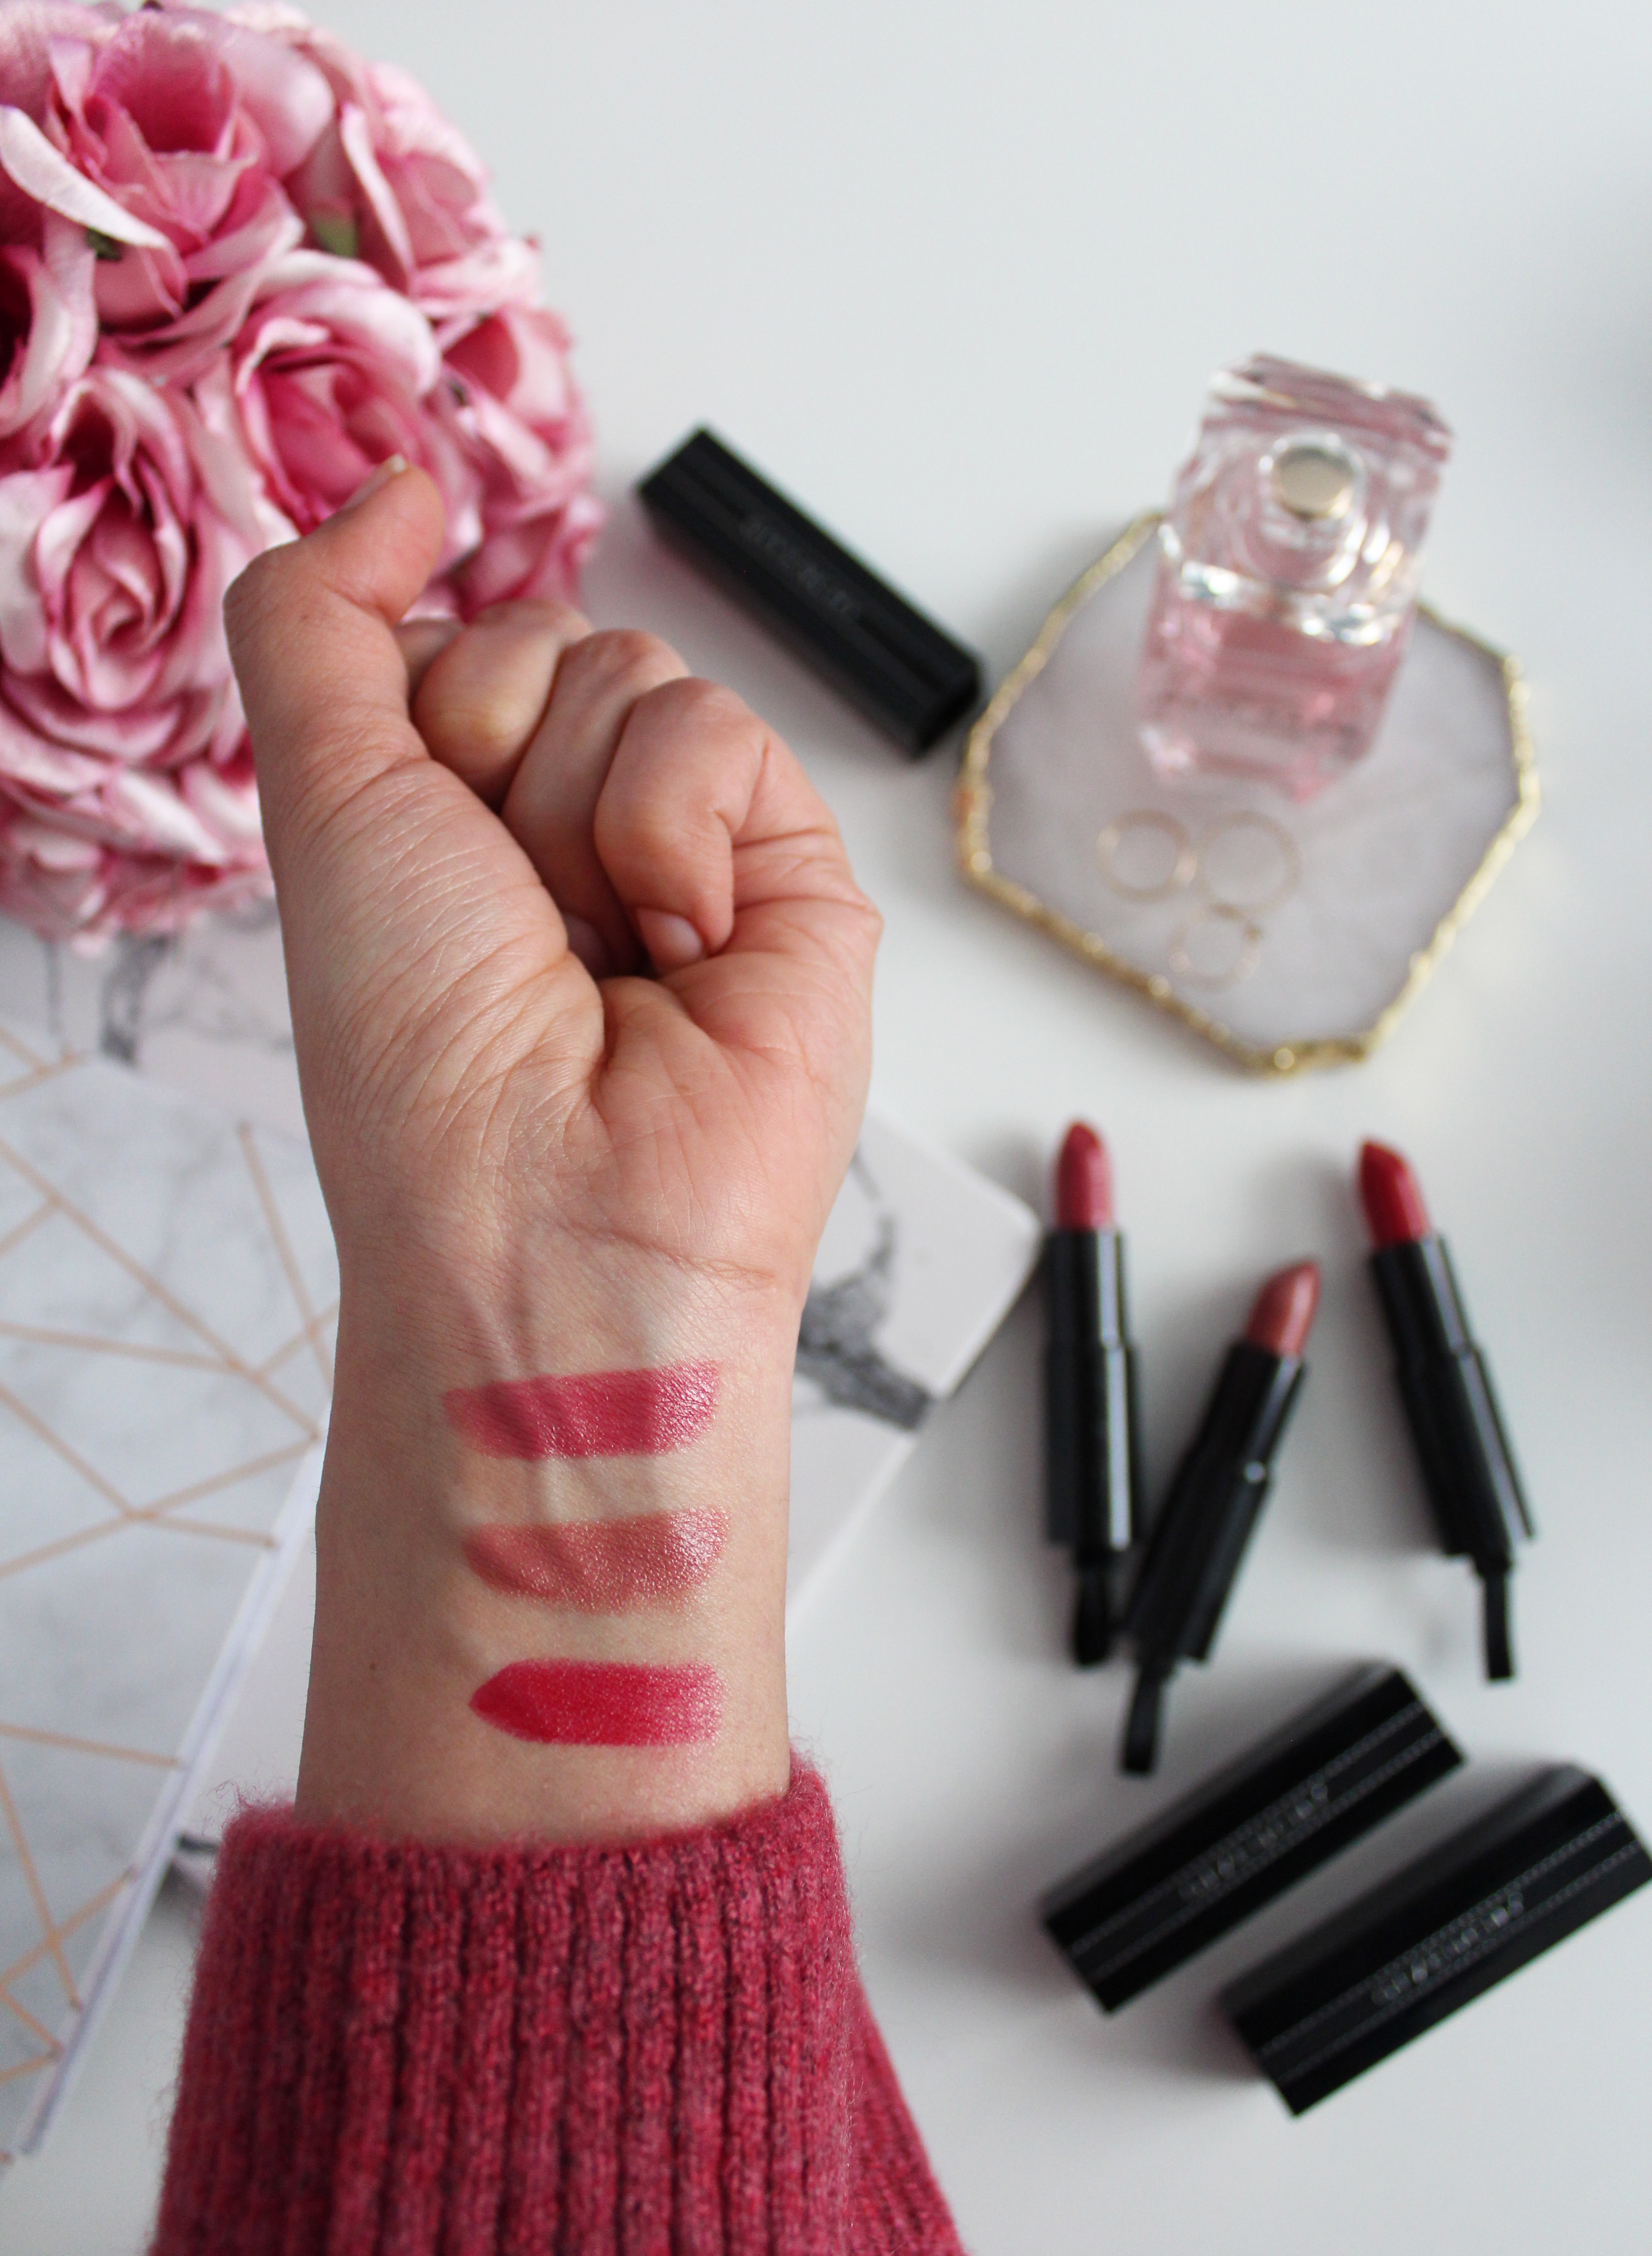 Givenchy lipstick swatches